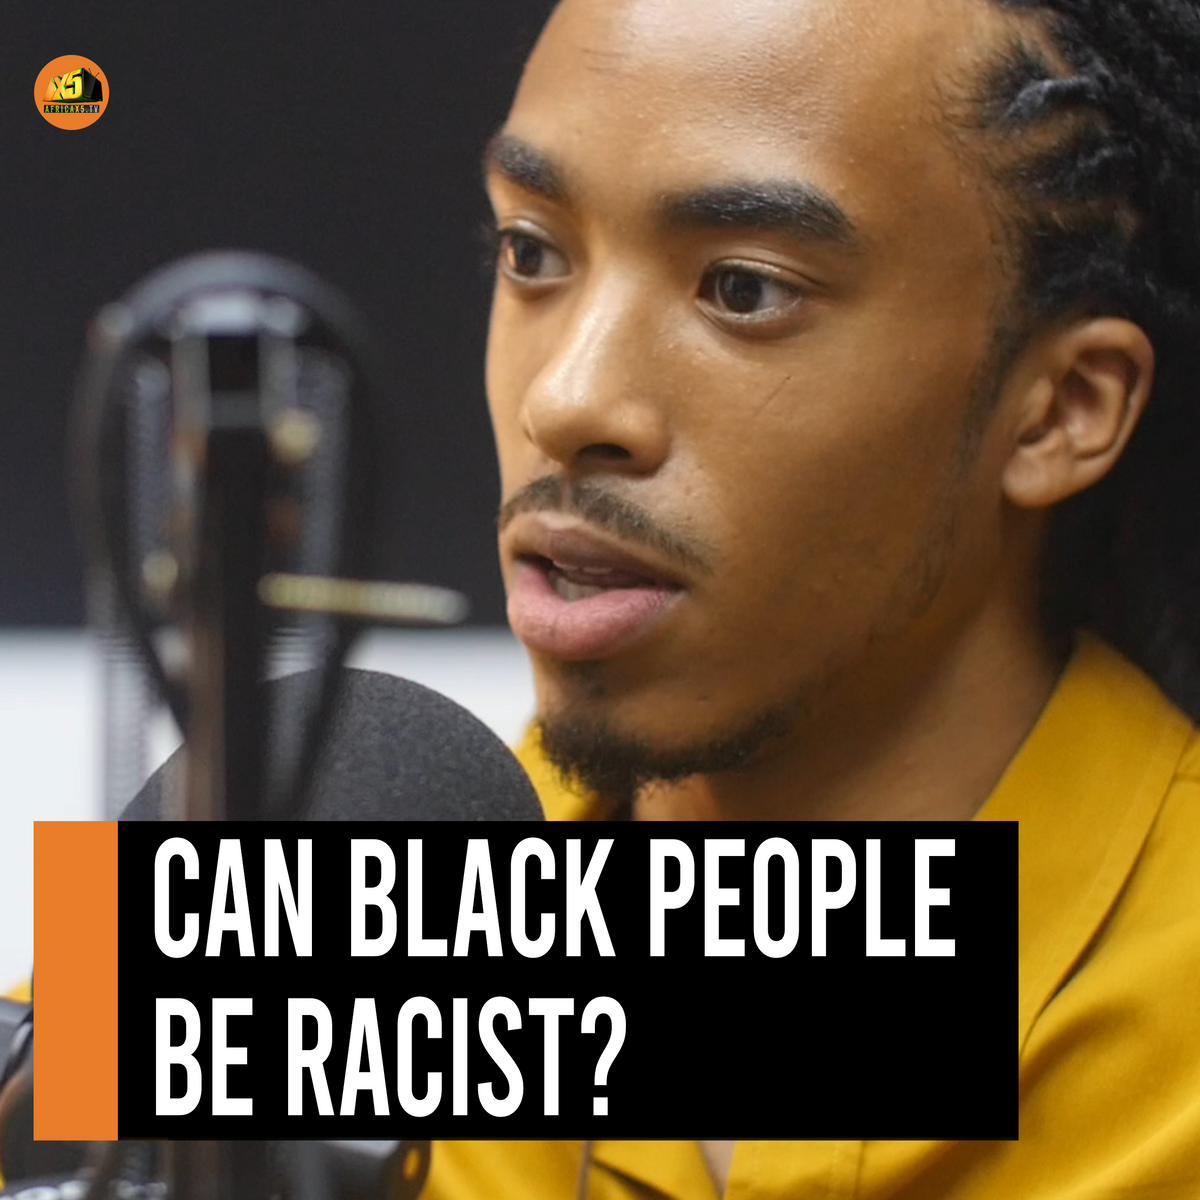 S1 EP1 - Can Black People be racist? (RACE AND IDENTITY)